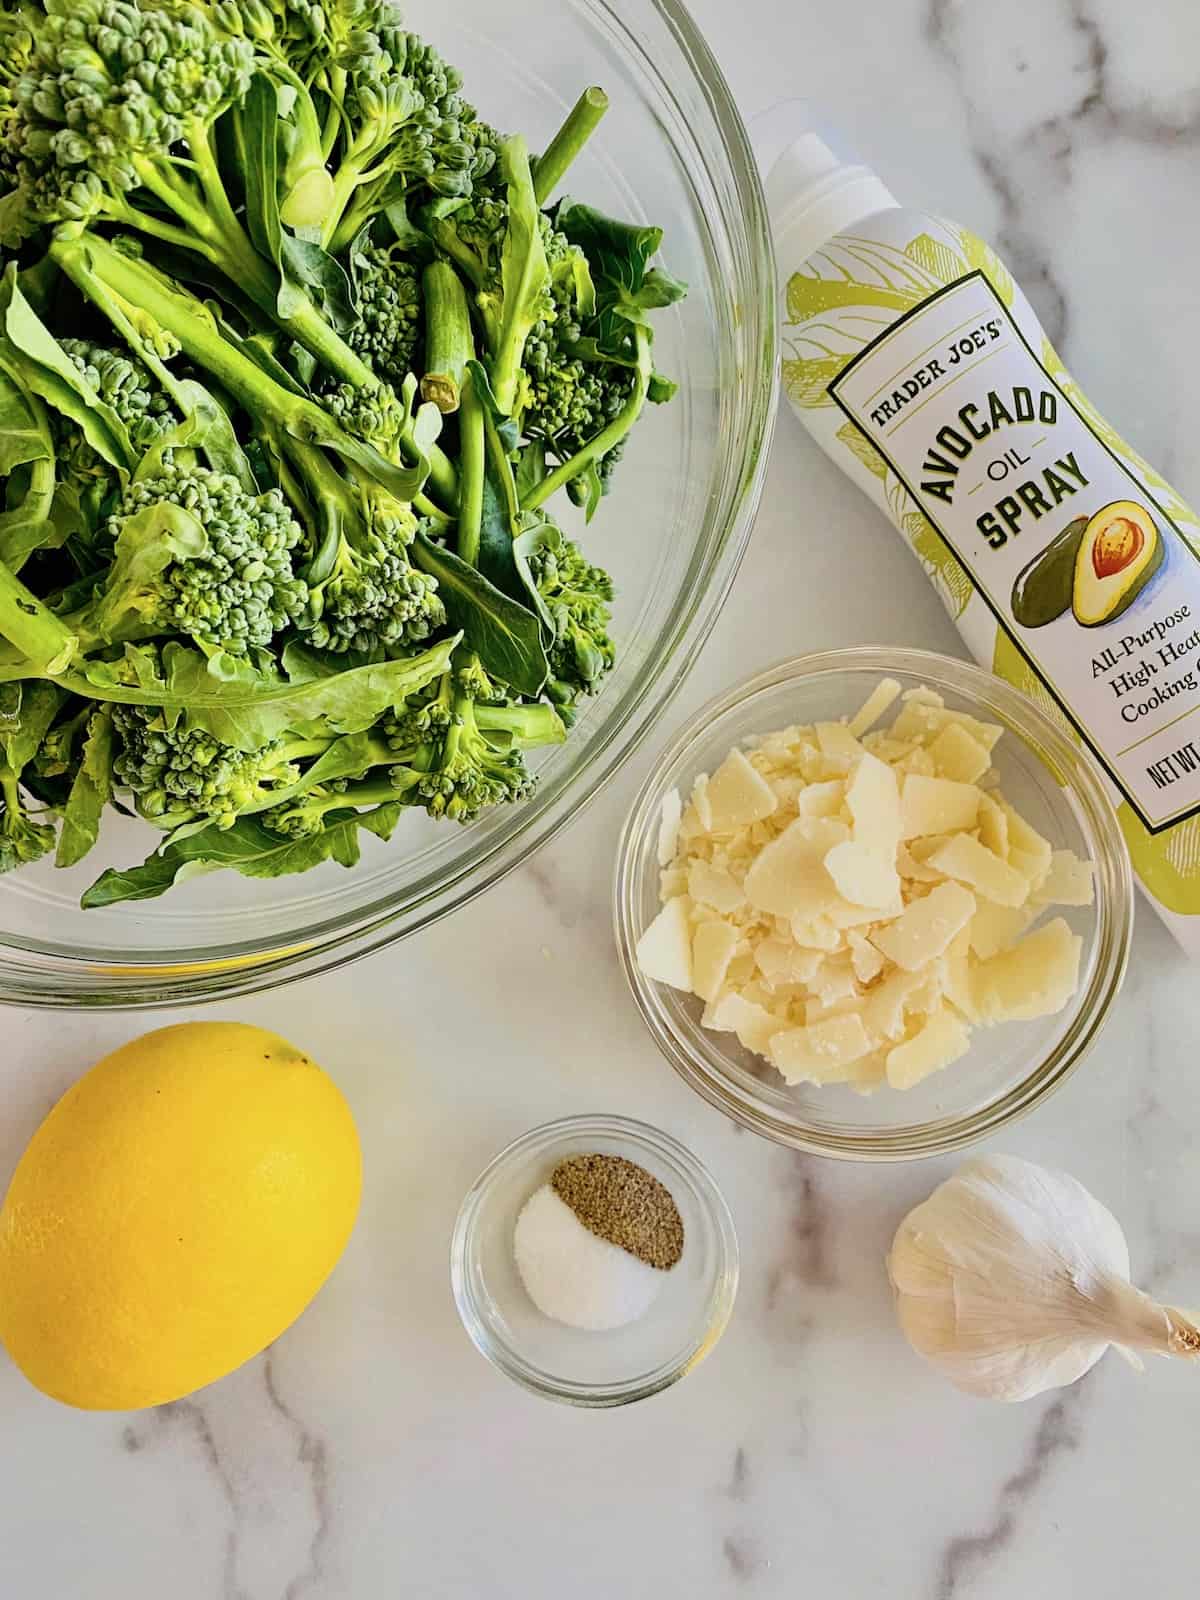 Ingredients for air fryer broccolini.